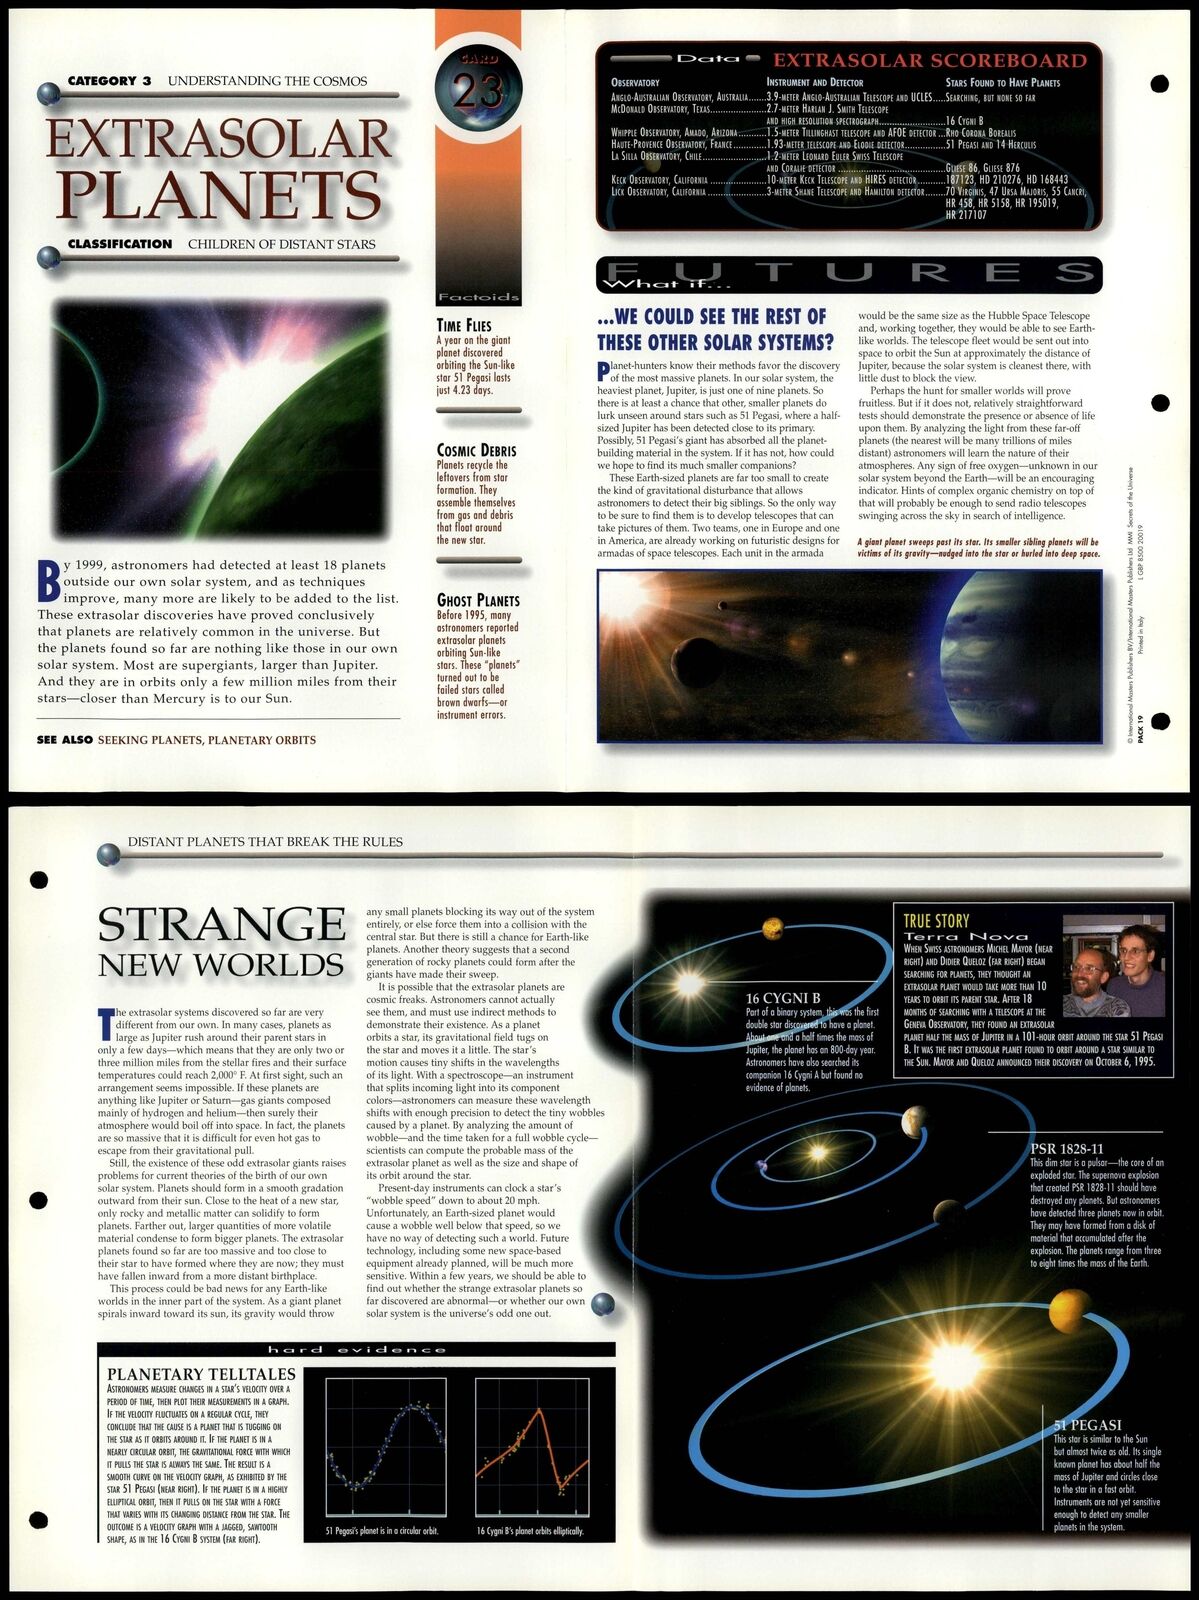 Extrasolar Planets #23 Cosmos Secrets Of The Universe Fact File Fold-Out Card